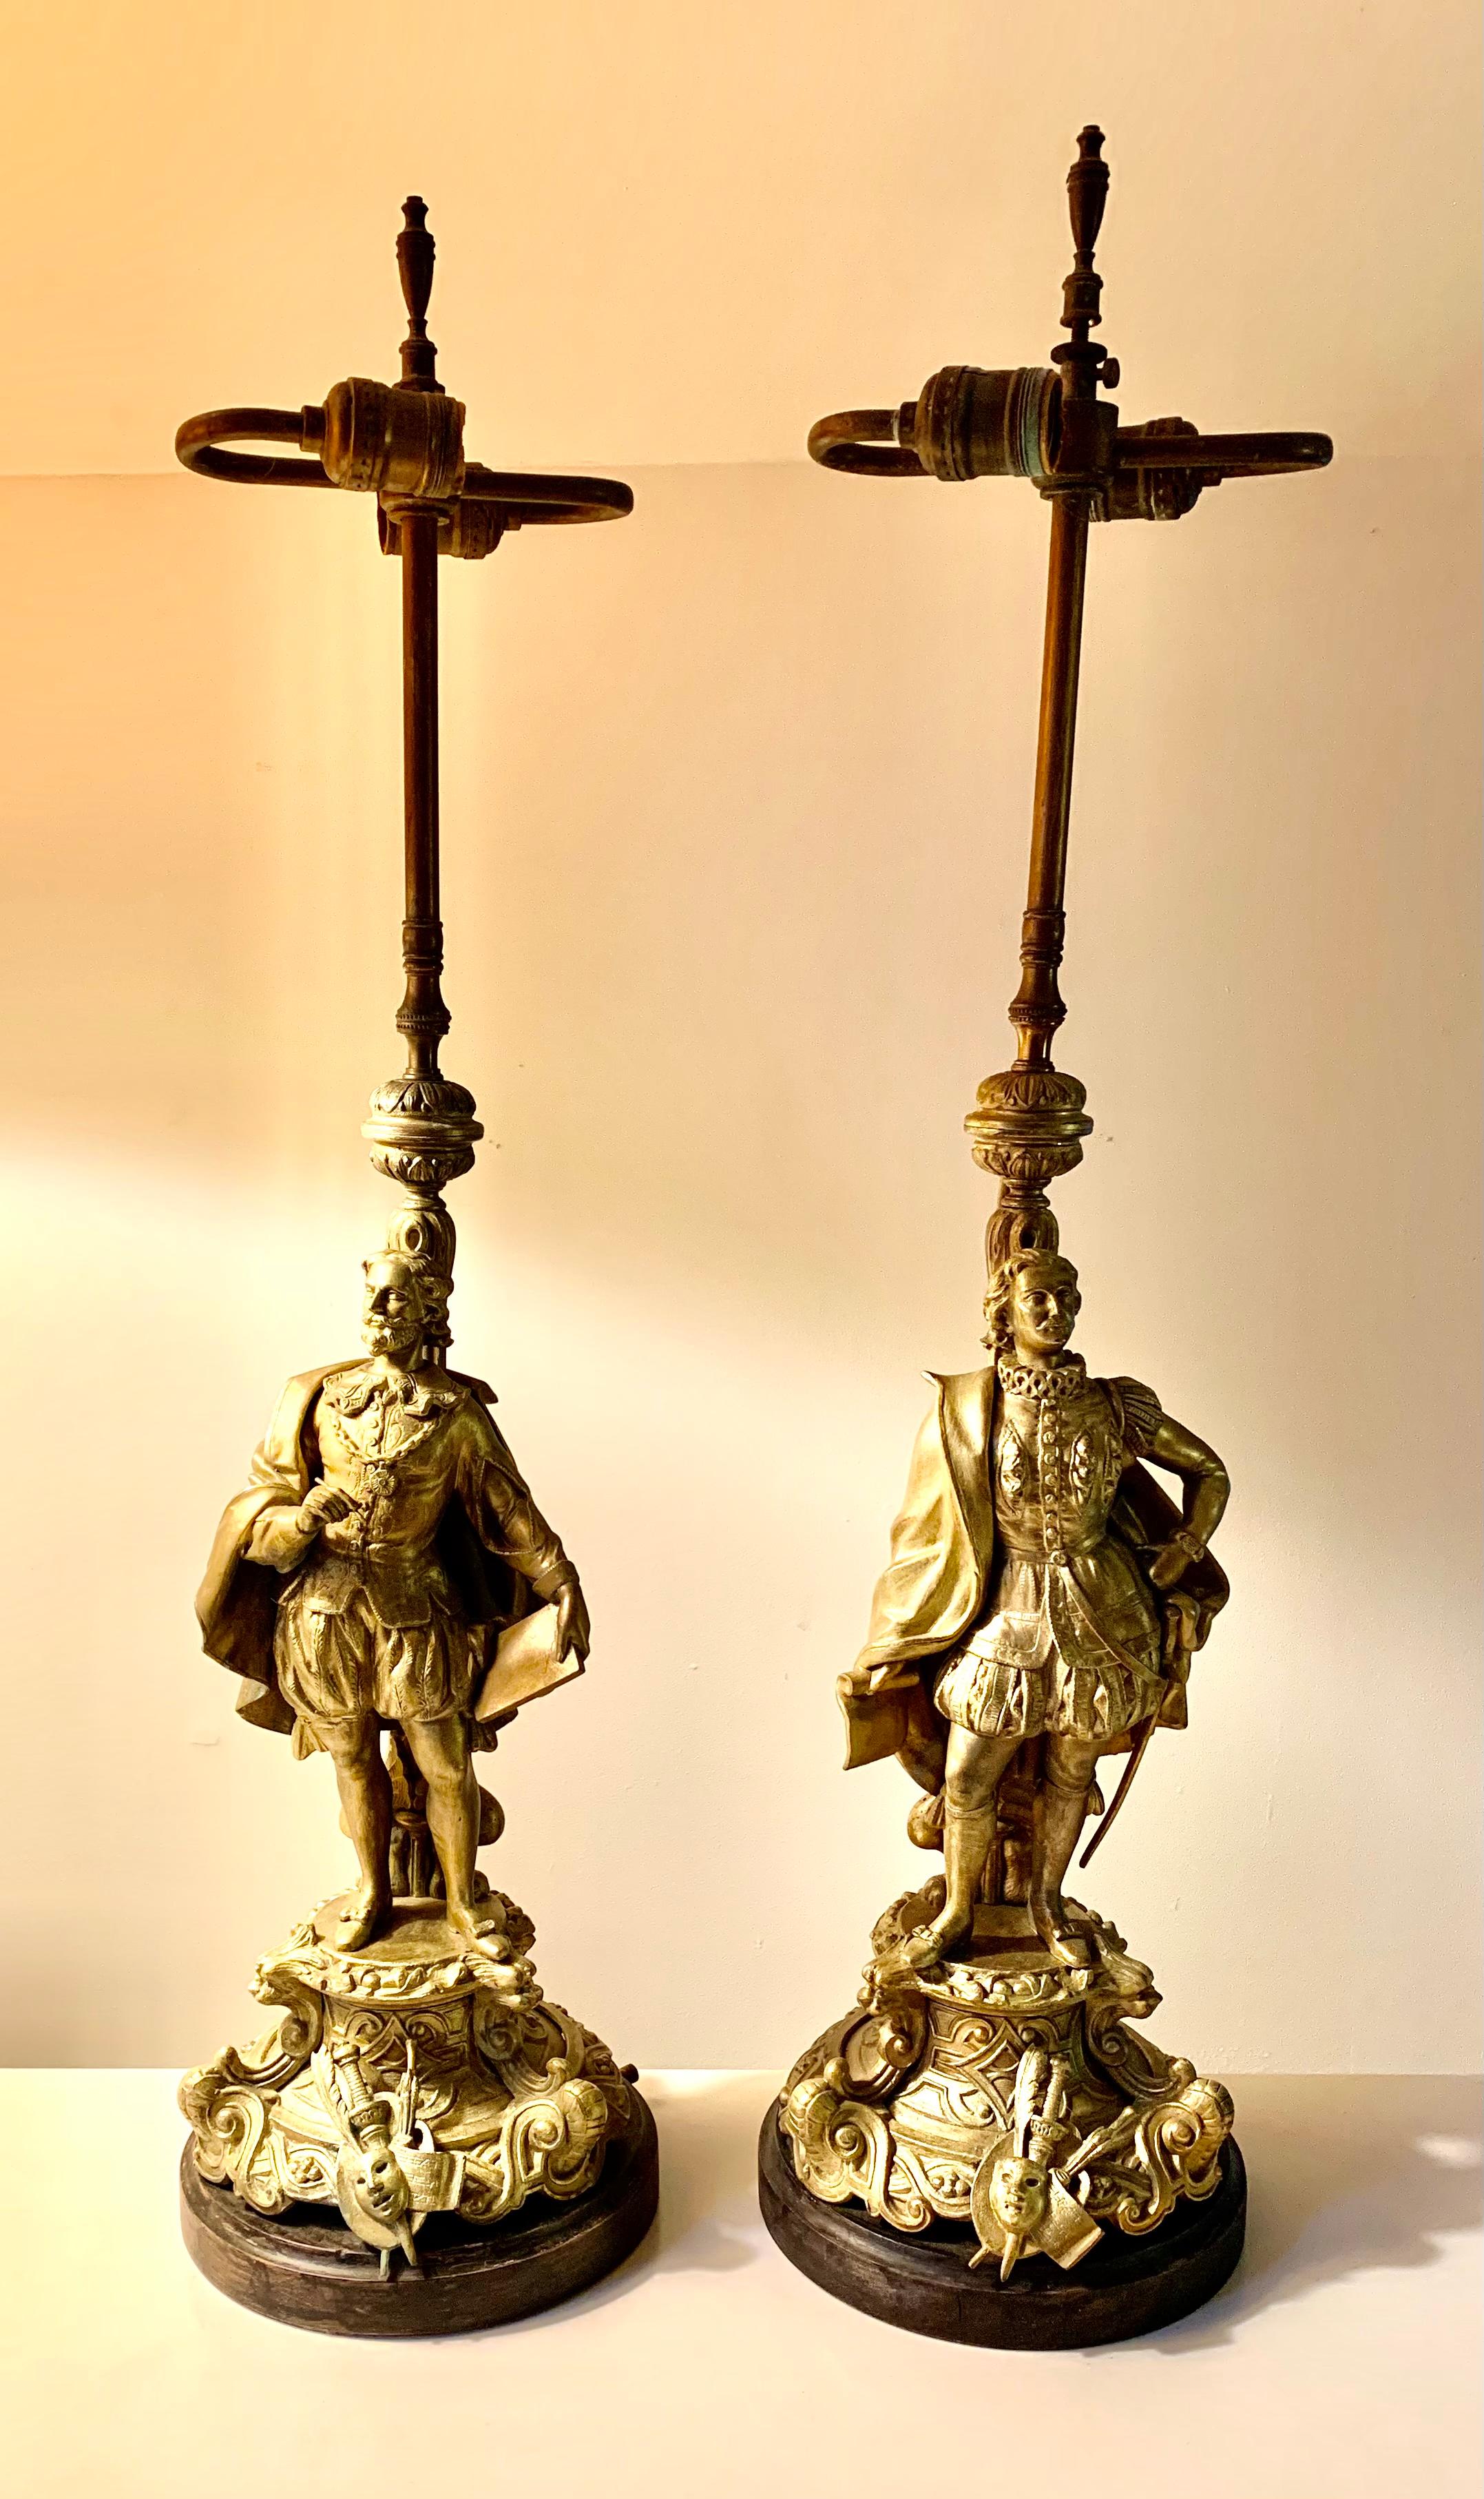 Fabulous pair of Elizabethan style 19th century theatrical interest figural table lamps depicting William Shakespeare and Christopher (Kit) Marlowe. 
Shakespeare in period formal attire holding a quill and parchment, Marlowe in high Elizabethan